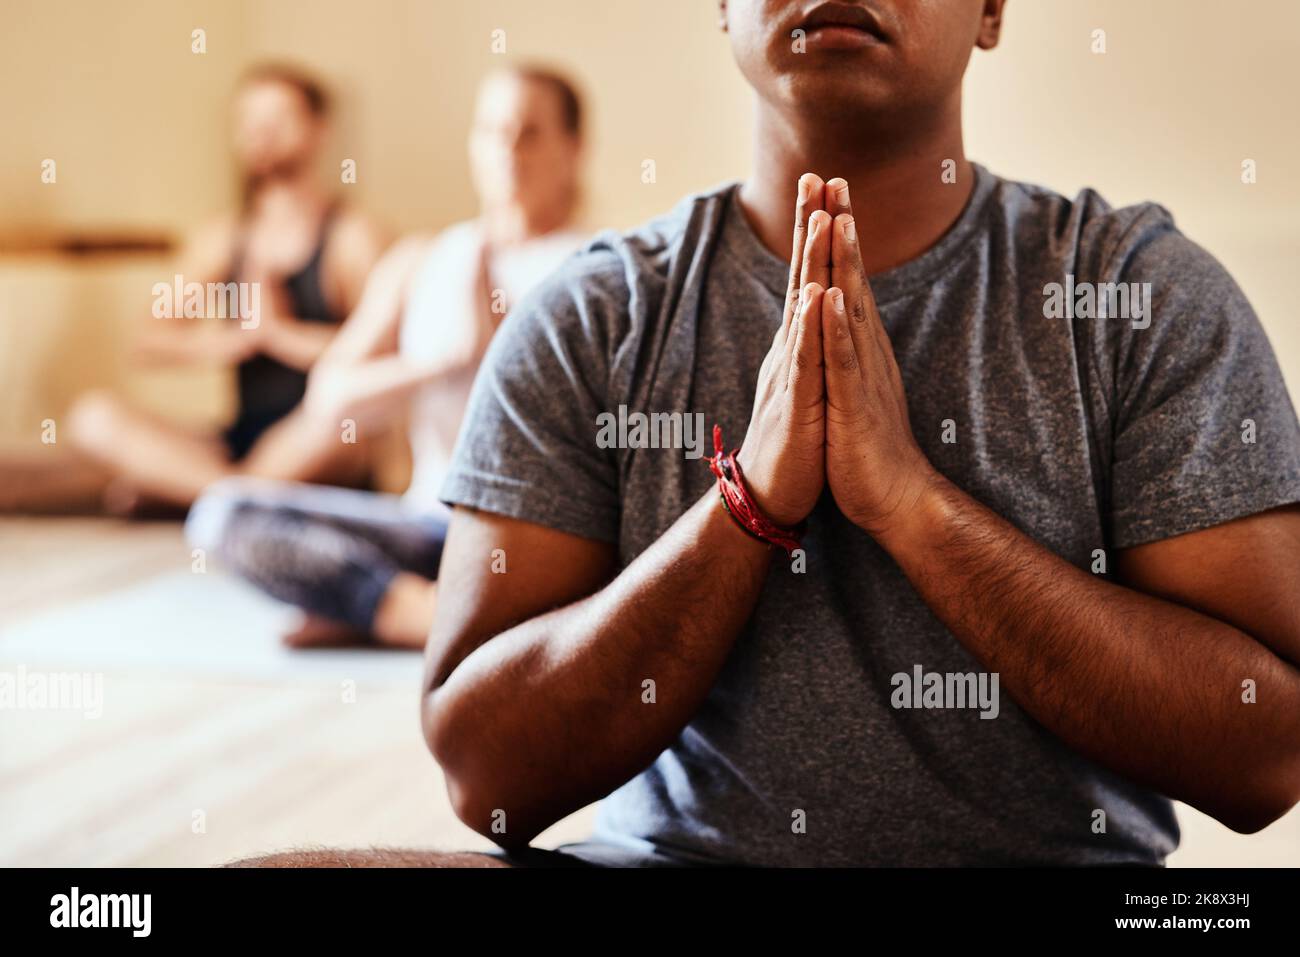 Tomorrow depends on what you do today. a group of young men and women meditating in a yoga class. Stock Photo